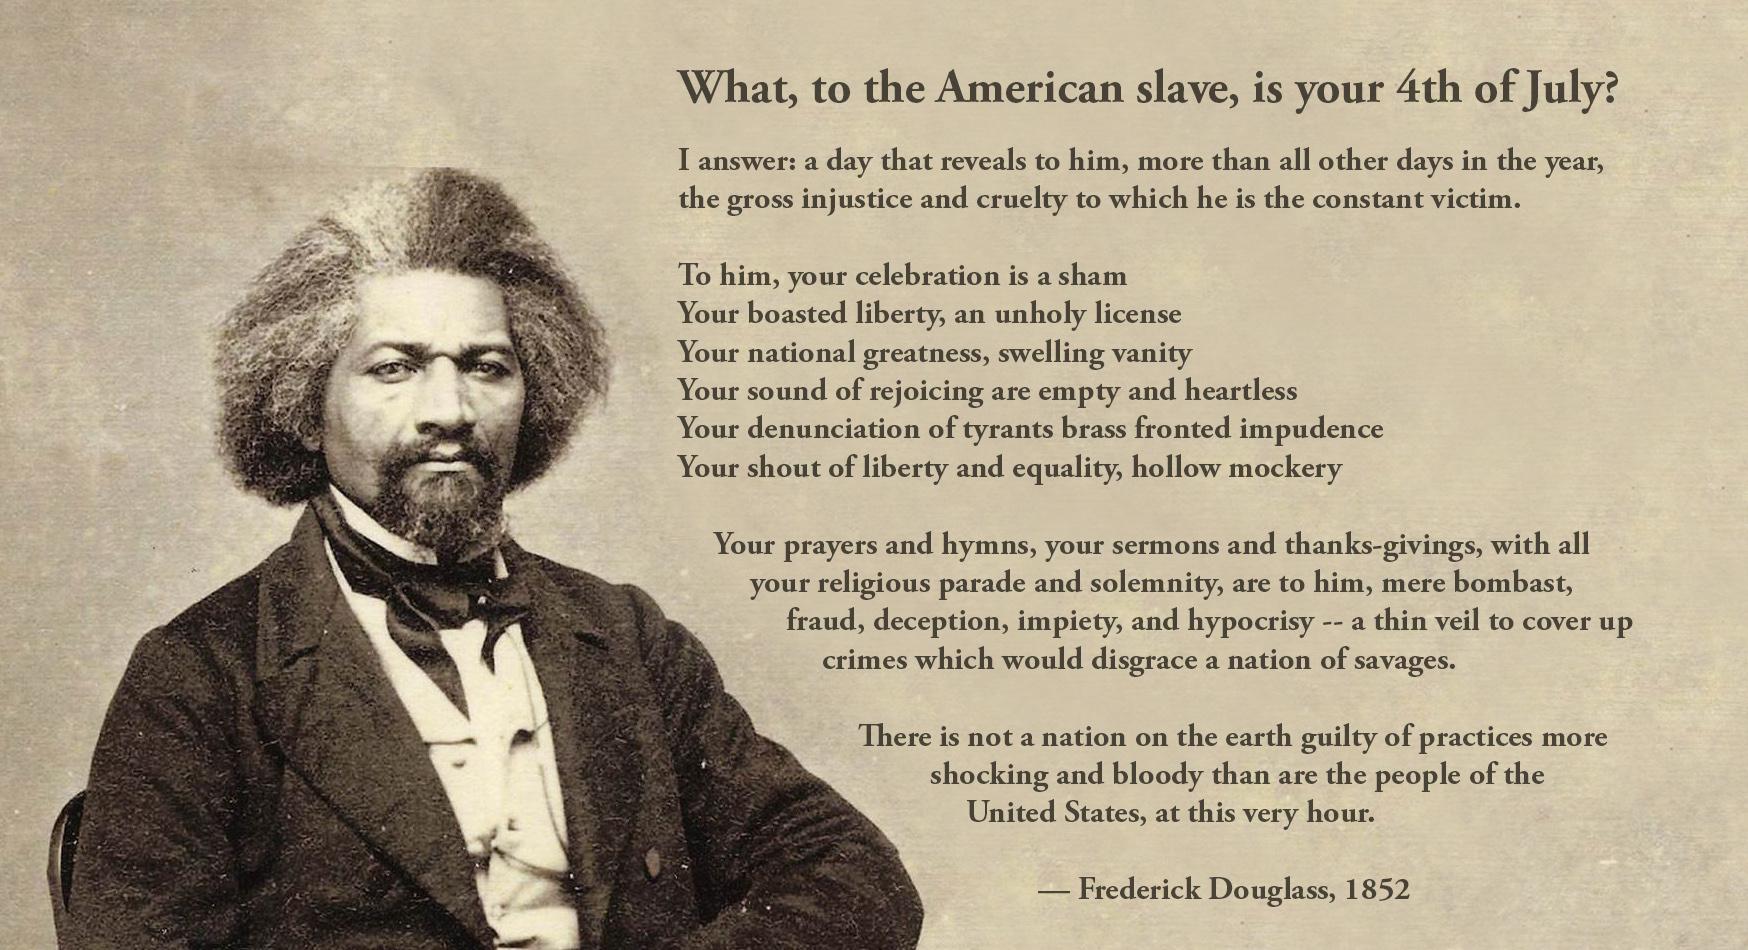 “What, to the American slave, is your 4th of July?” – Frederick